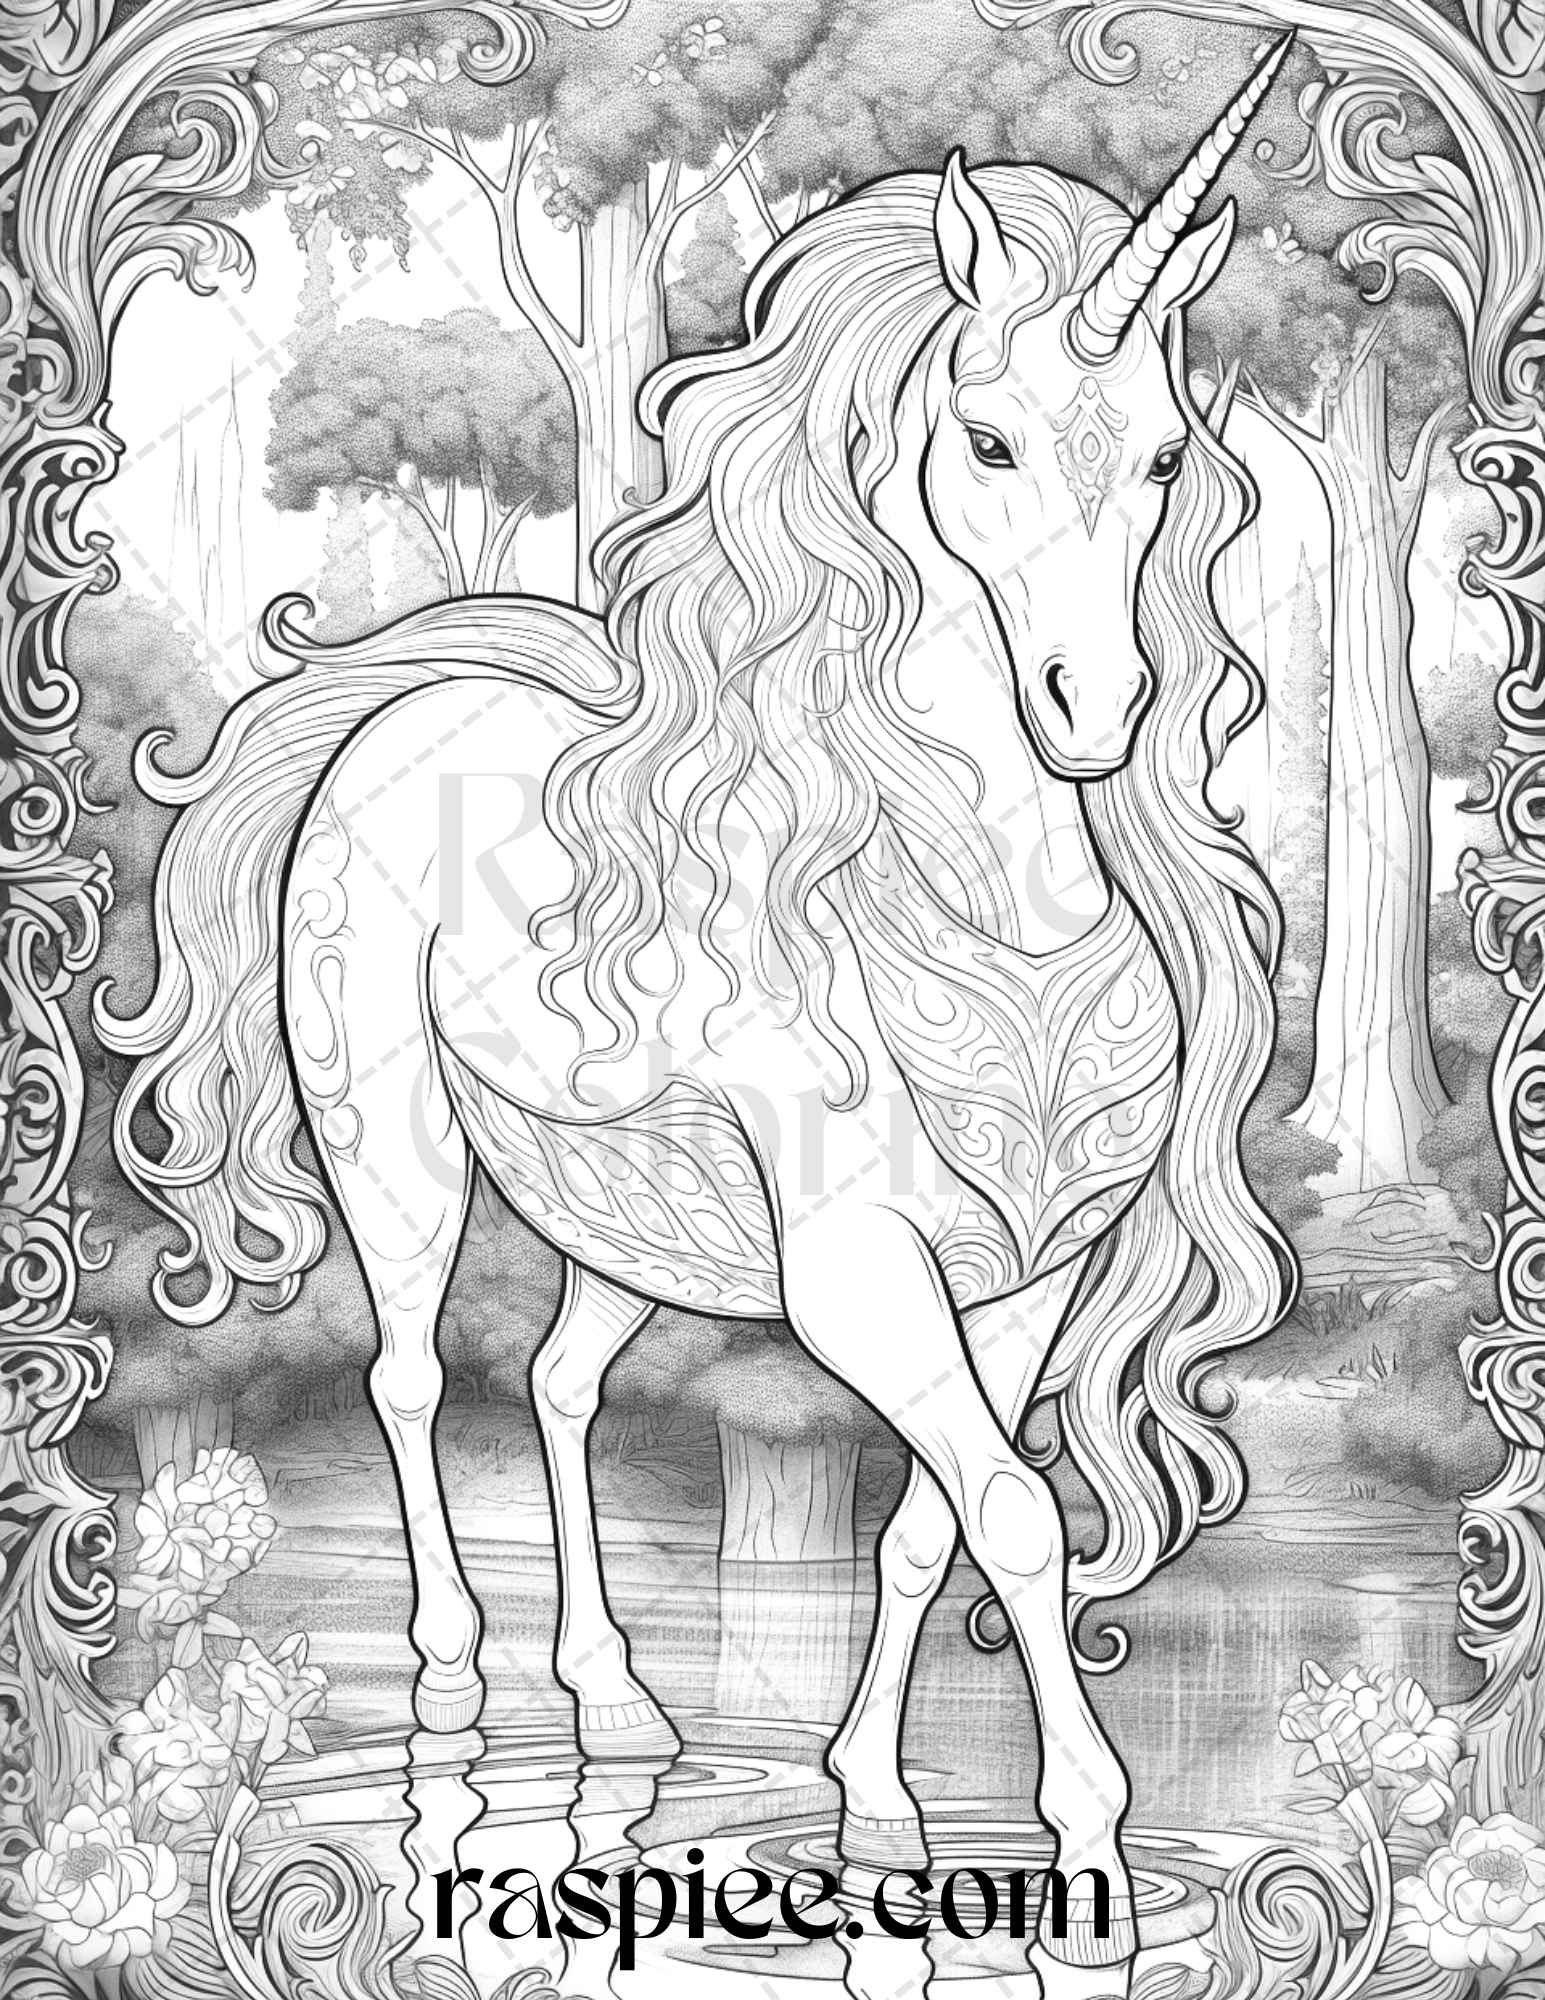 enchanted unicorns grayscale coloring pages, printable coloring pages for adults, unicorn art for coloring, grayscale coloring sheets, stress relief coloring pages